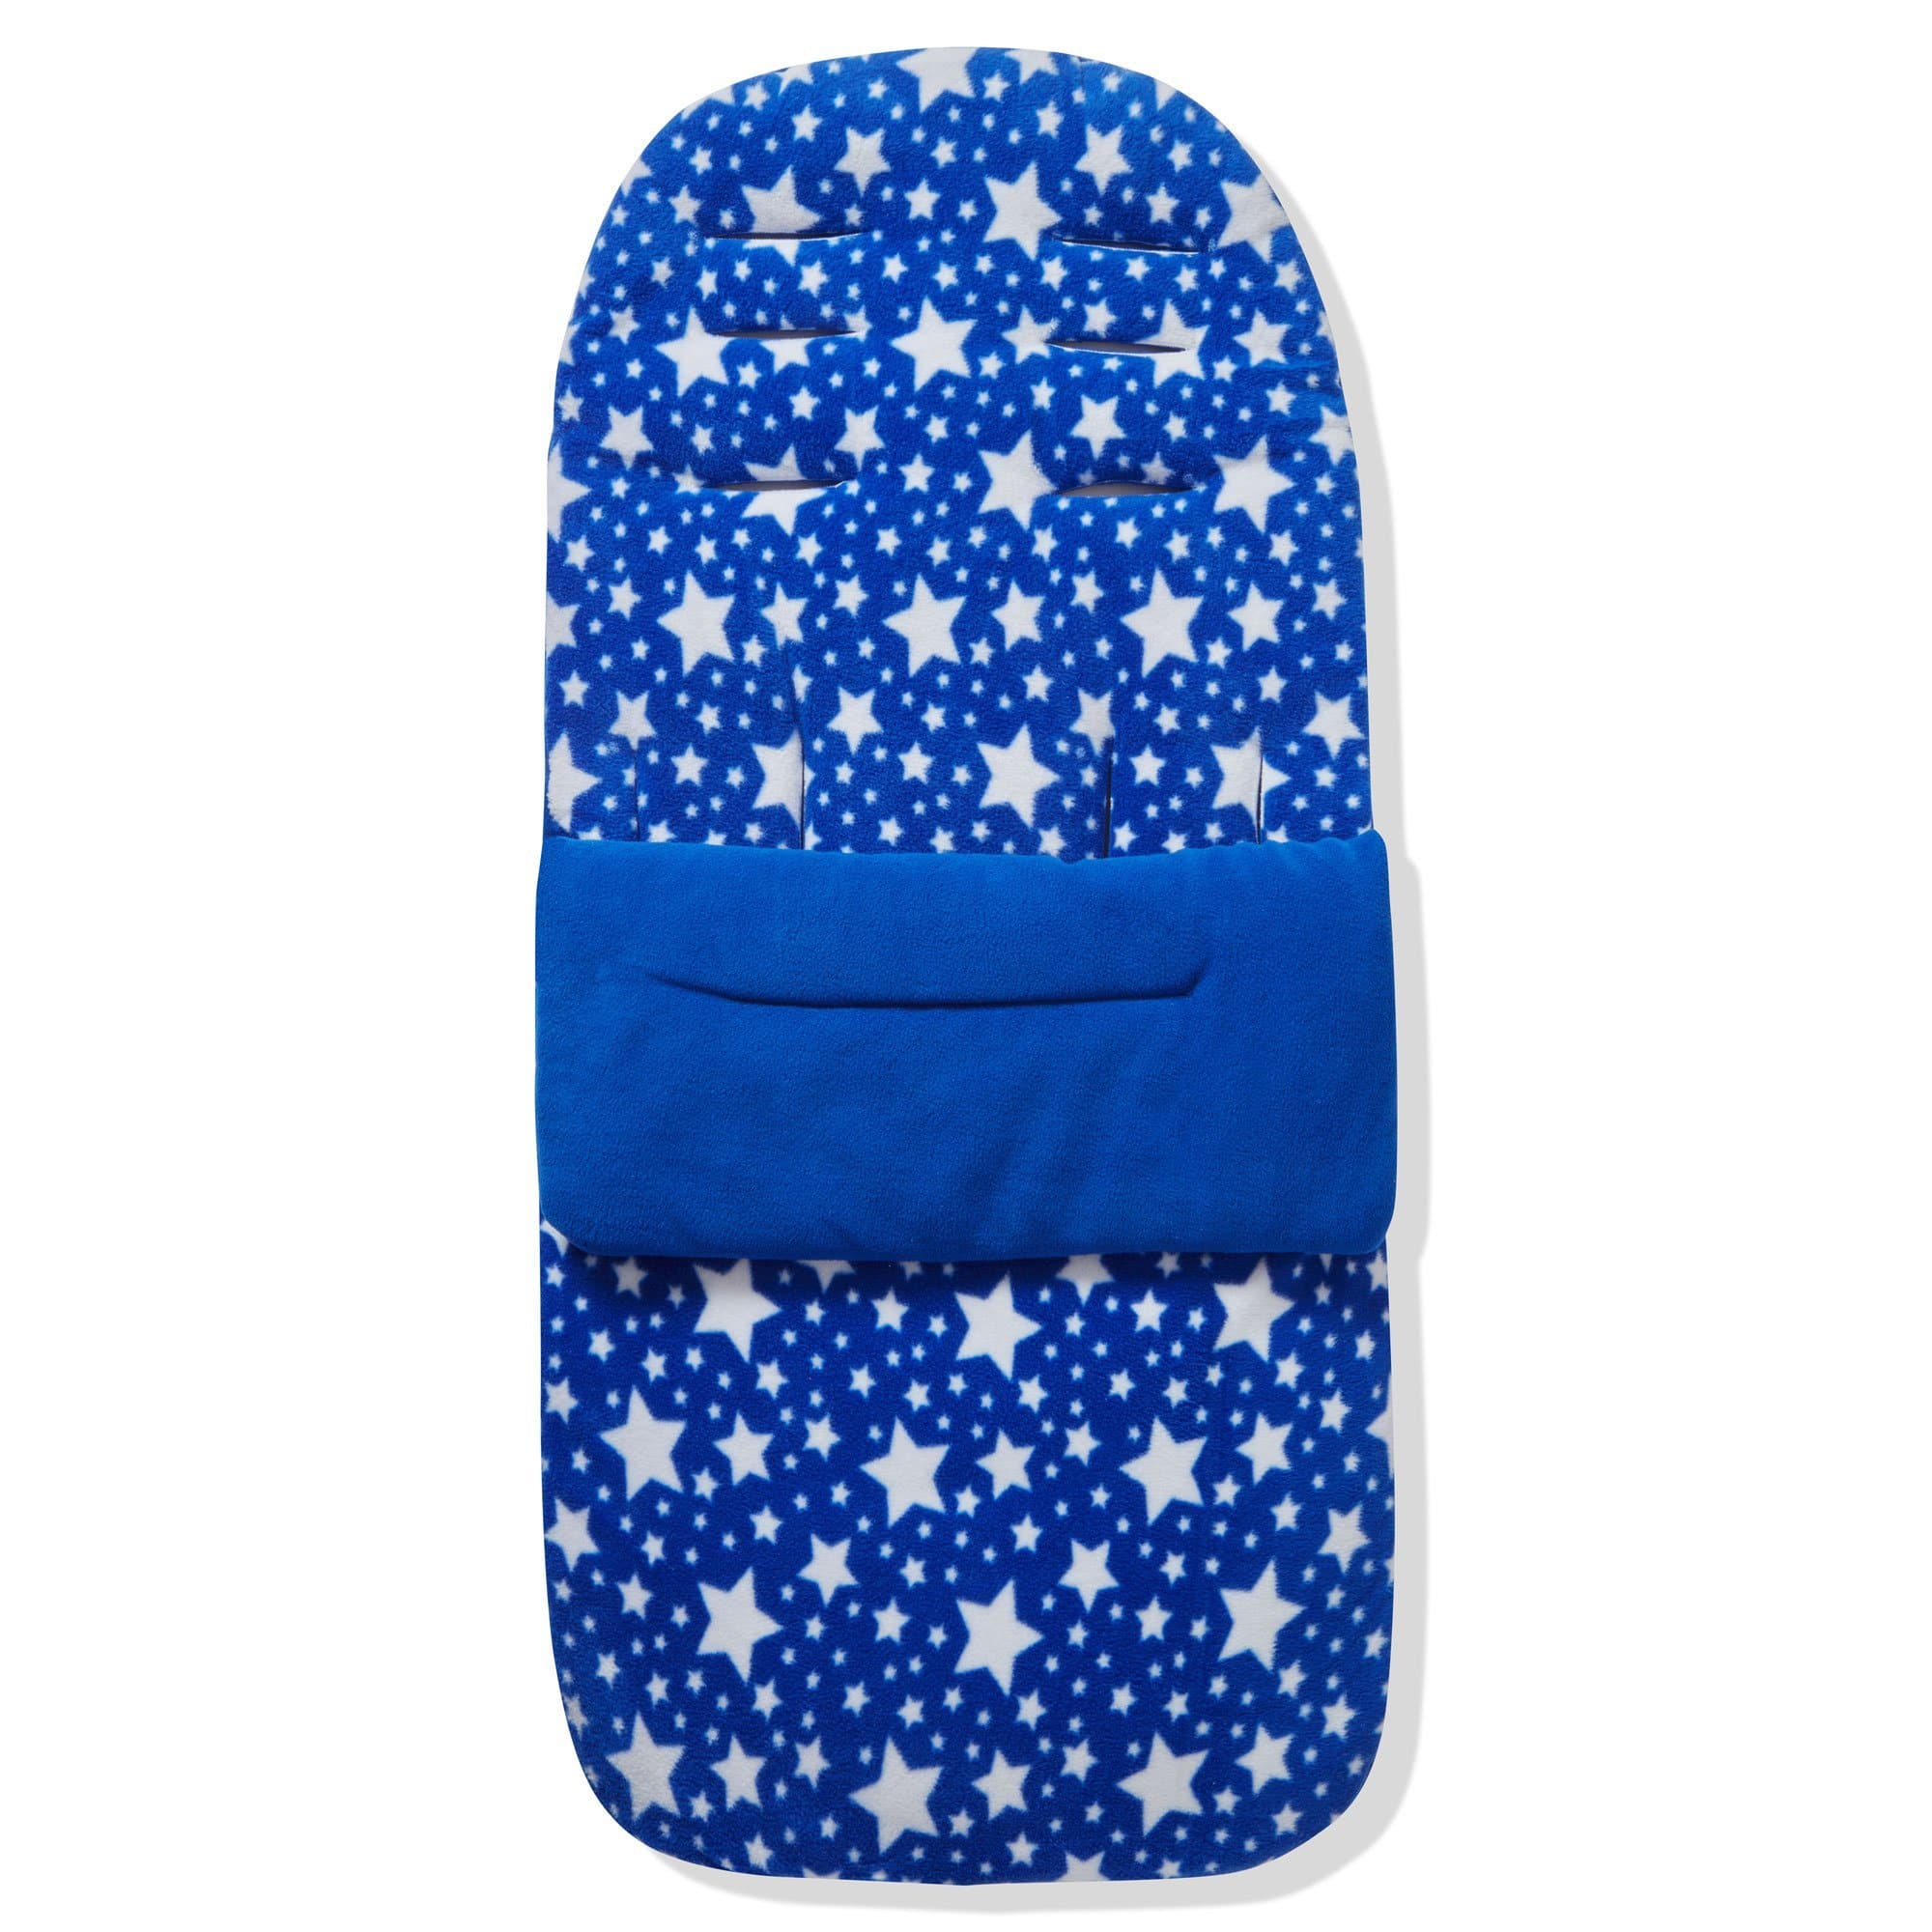 Fleece Footmuff / Cosy Toes Compatible with NeoNato - Blue Star / Fits All Models | For Your Little One